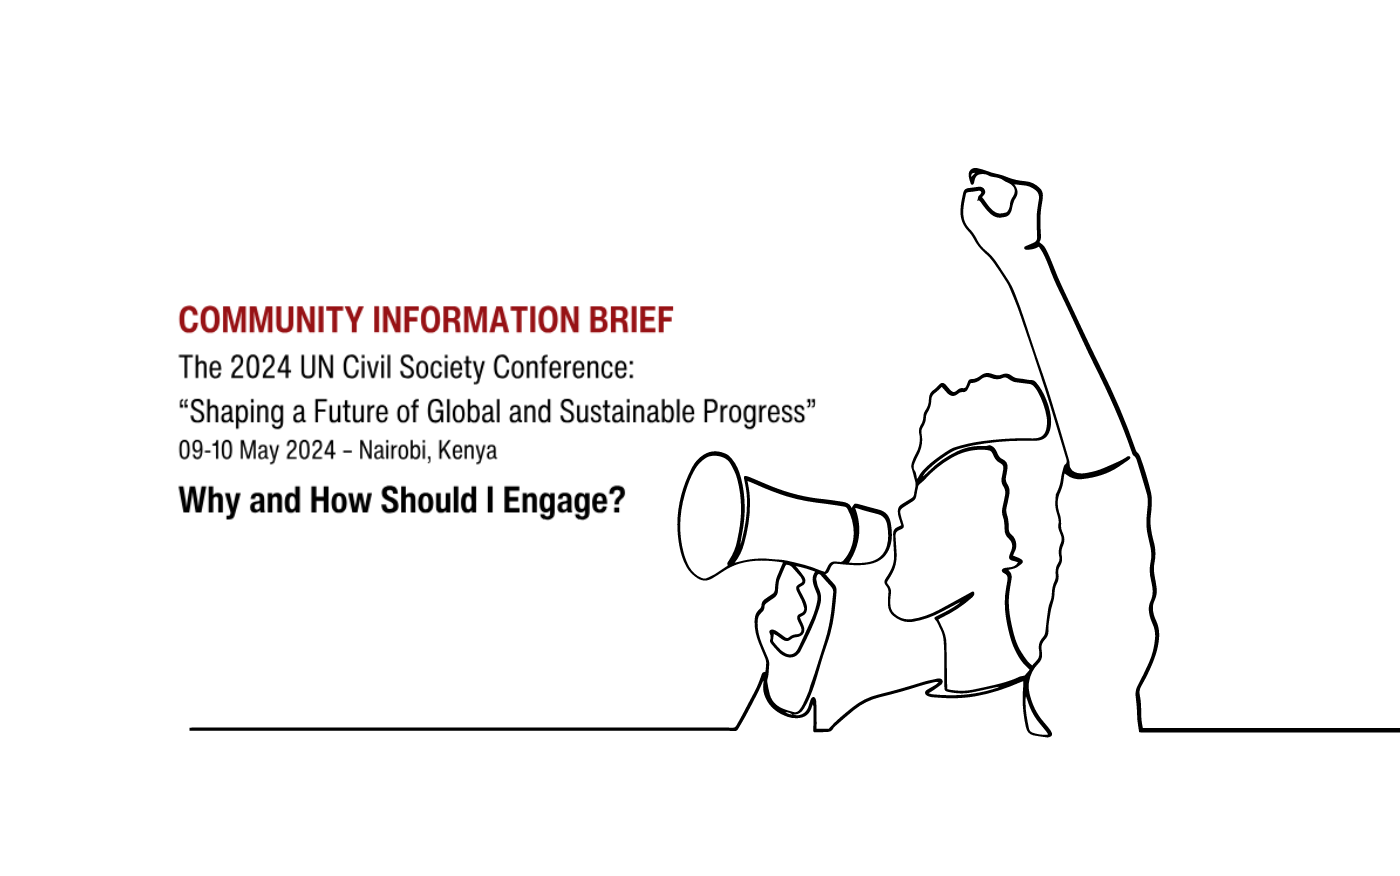 The 2024 UN Civil Society Conference: “Shaping a Future of Global and Sustainable Progress” (9-10 May 2024 in Nairobi, Kenya) – Community Brief